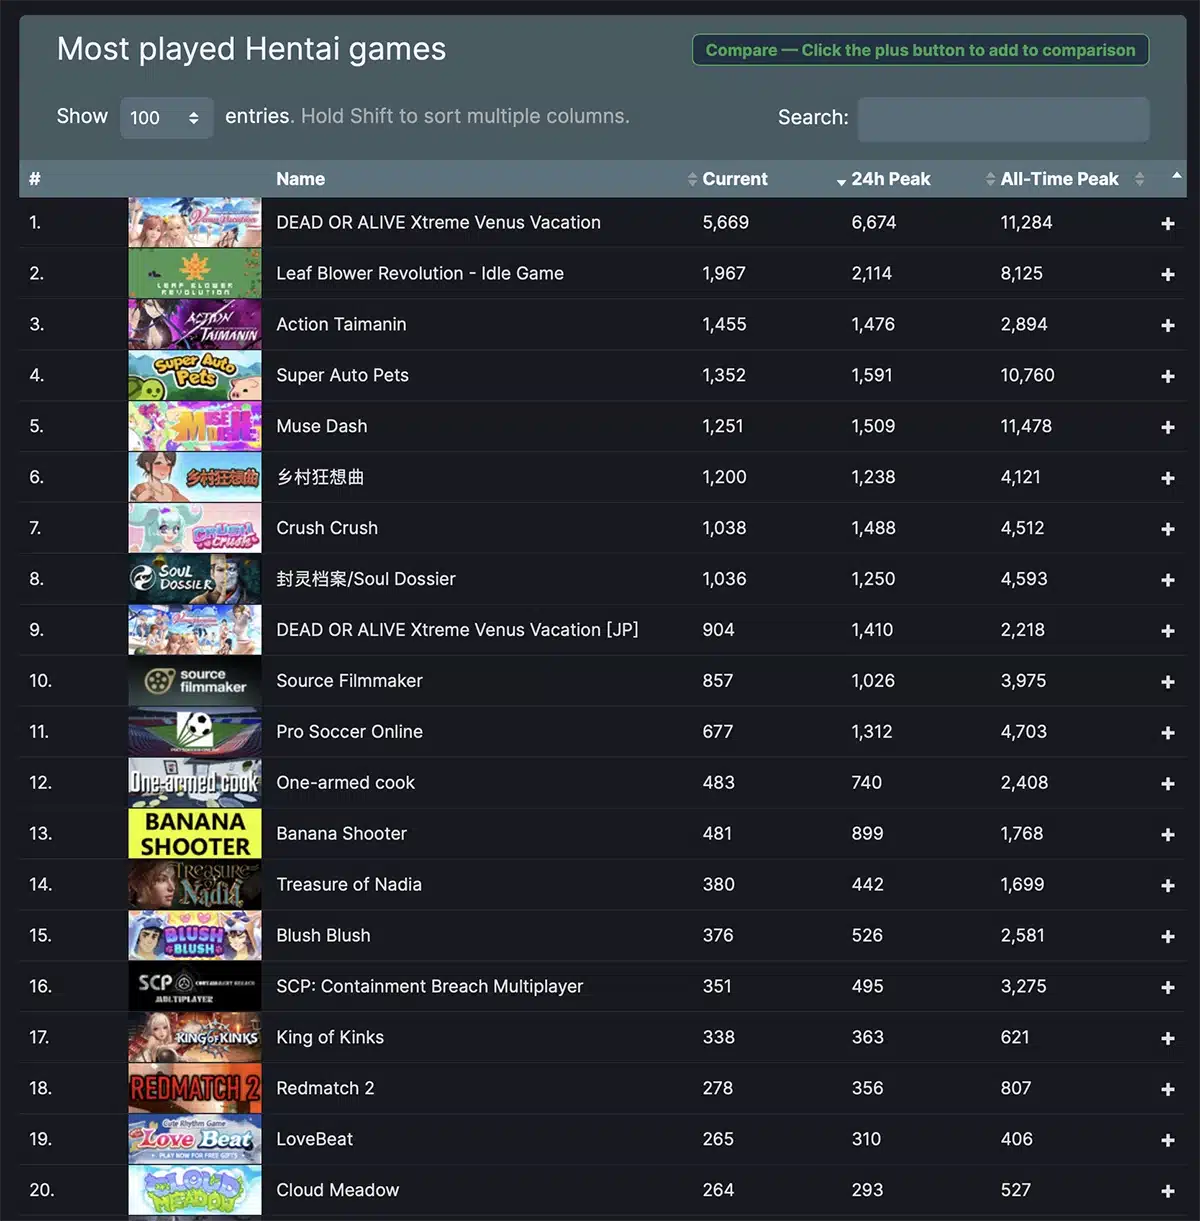 Most played hentai games on Steam